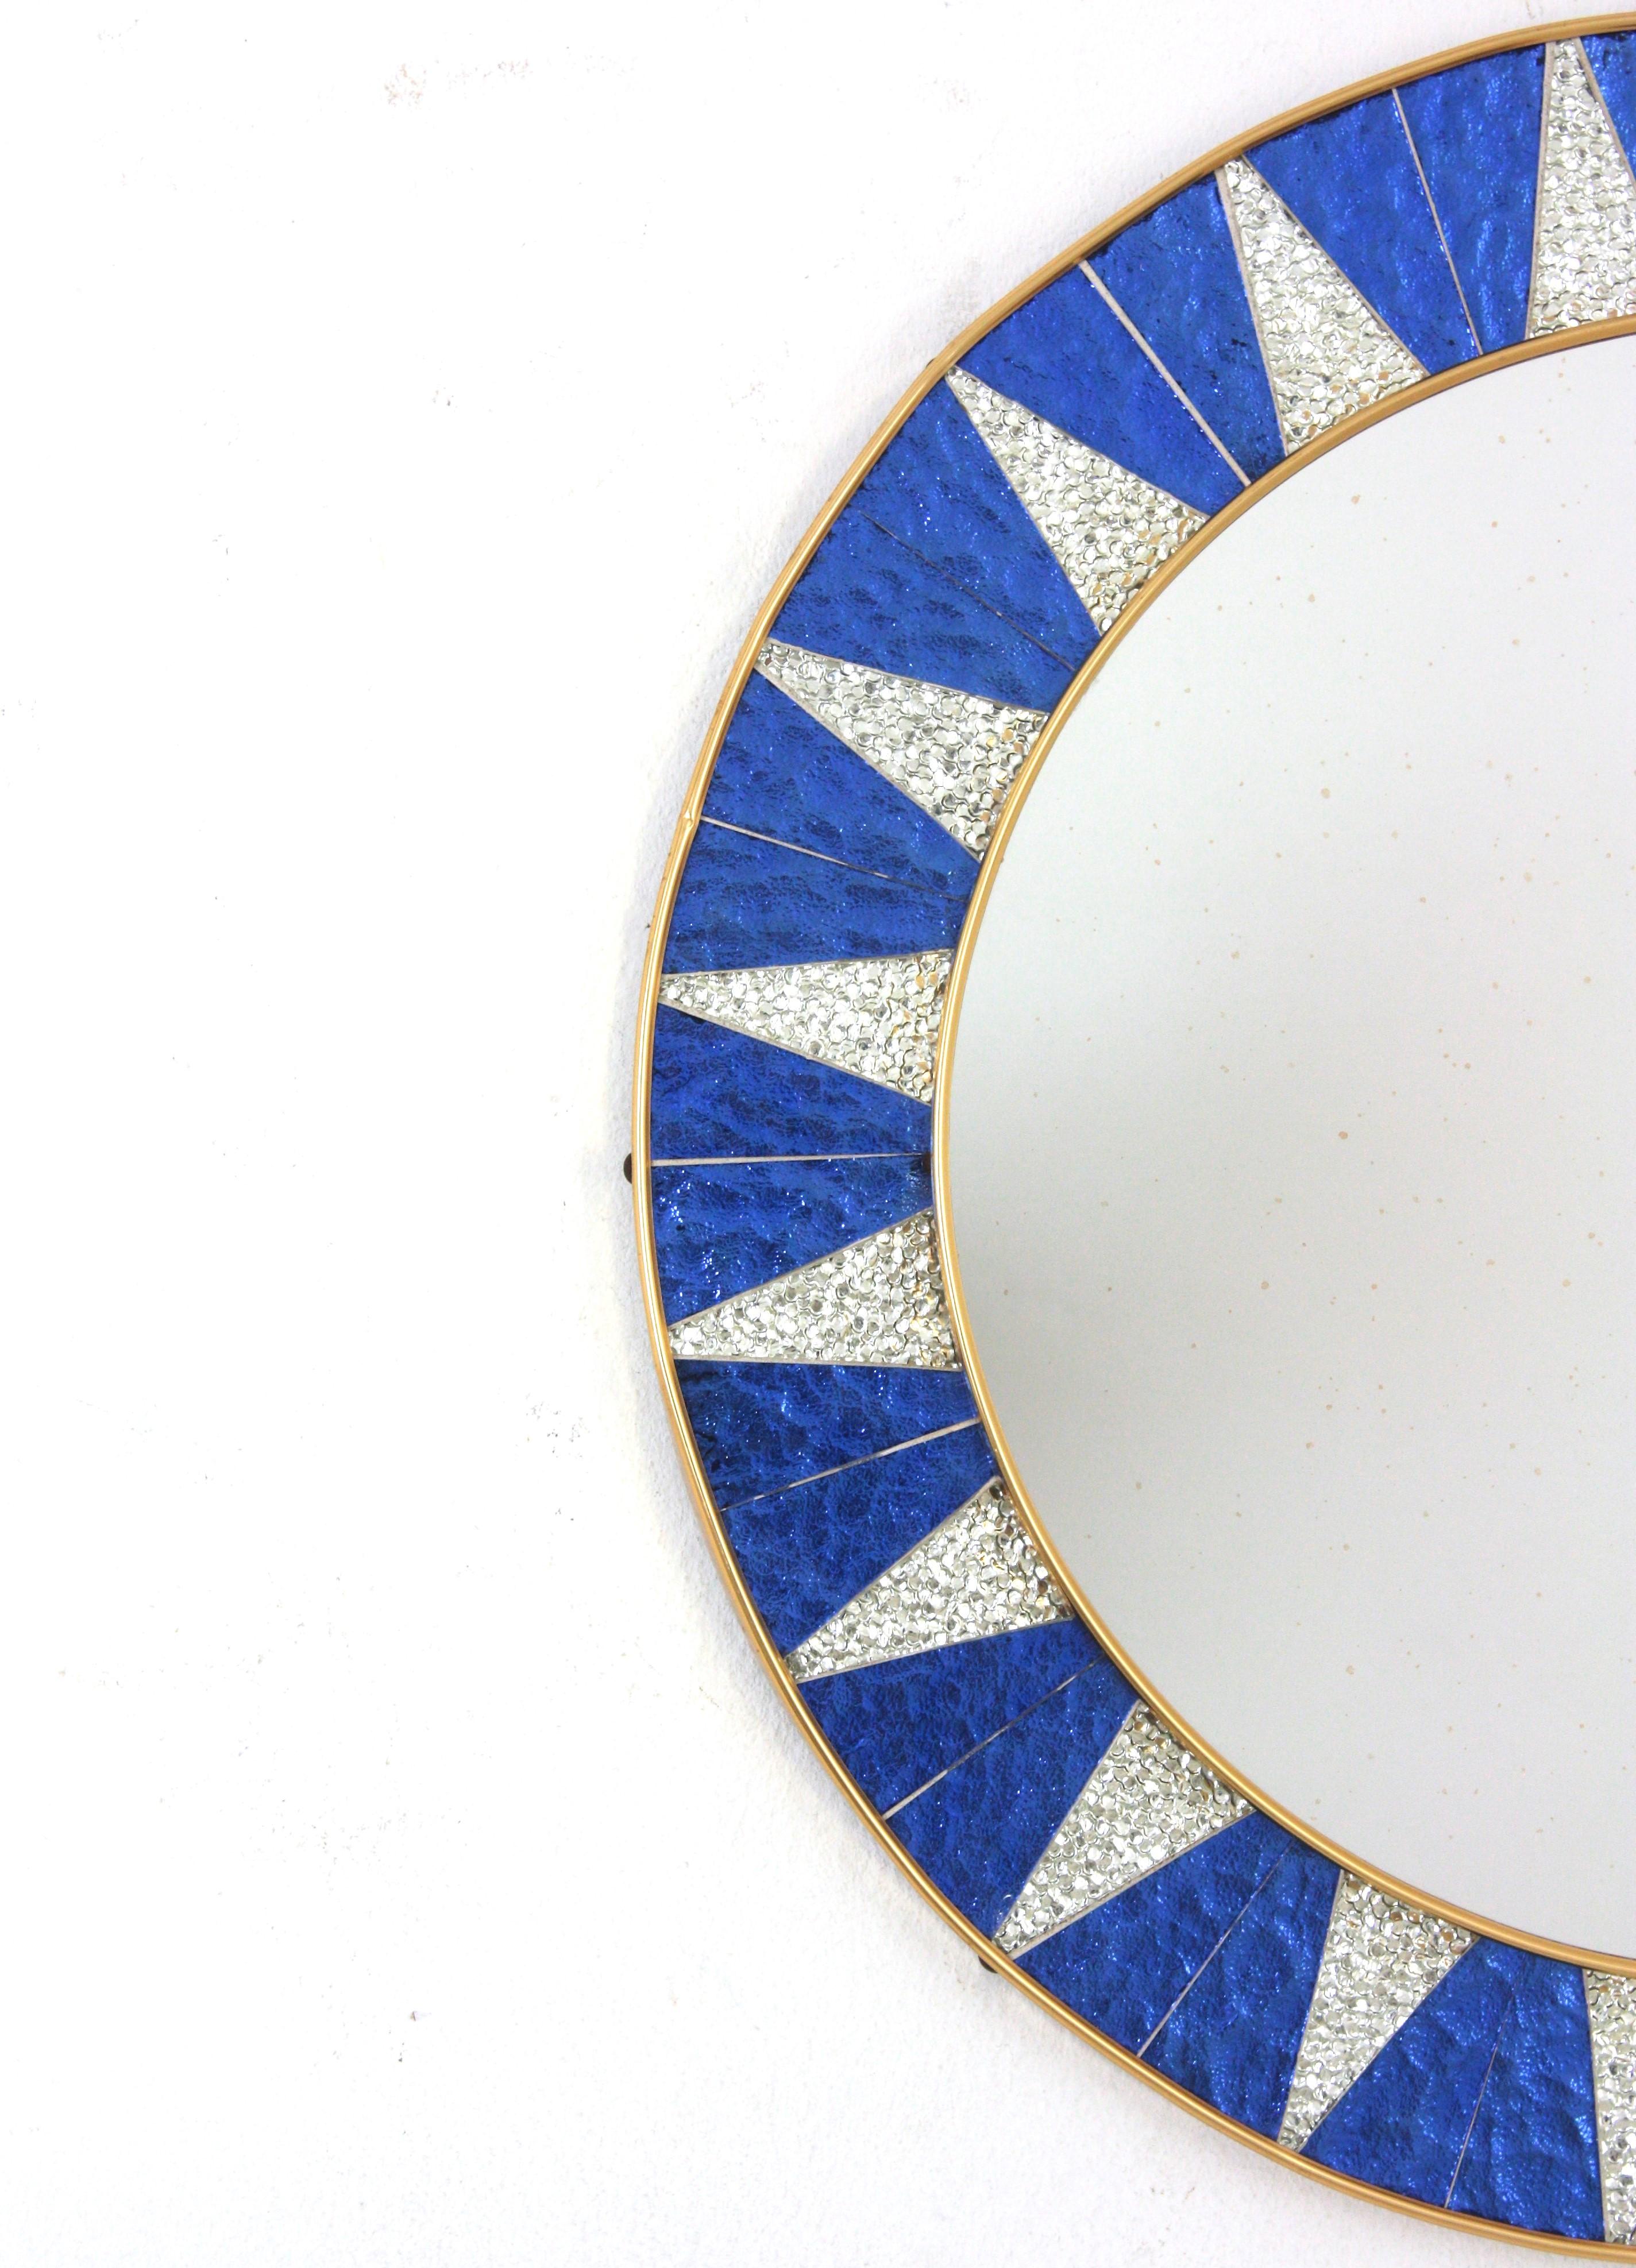 Hand-Crafted Sunburst Mirror with Blue and Silvered Mosaic Glass Frame, Spain, 1960s For Sale